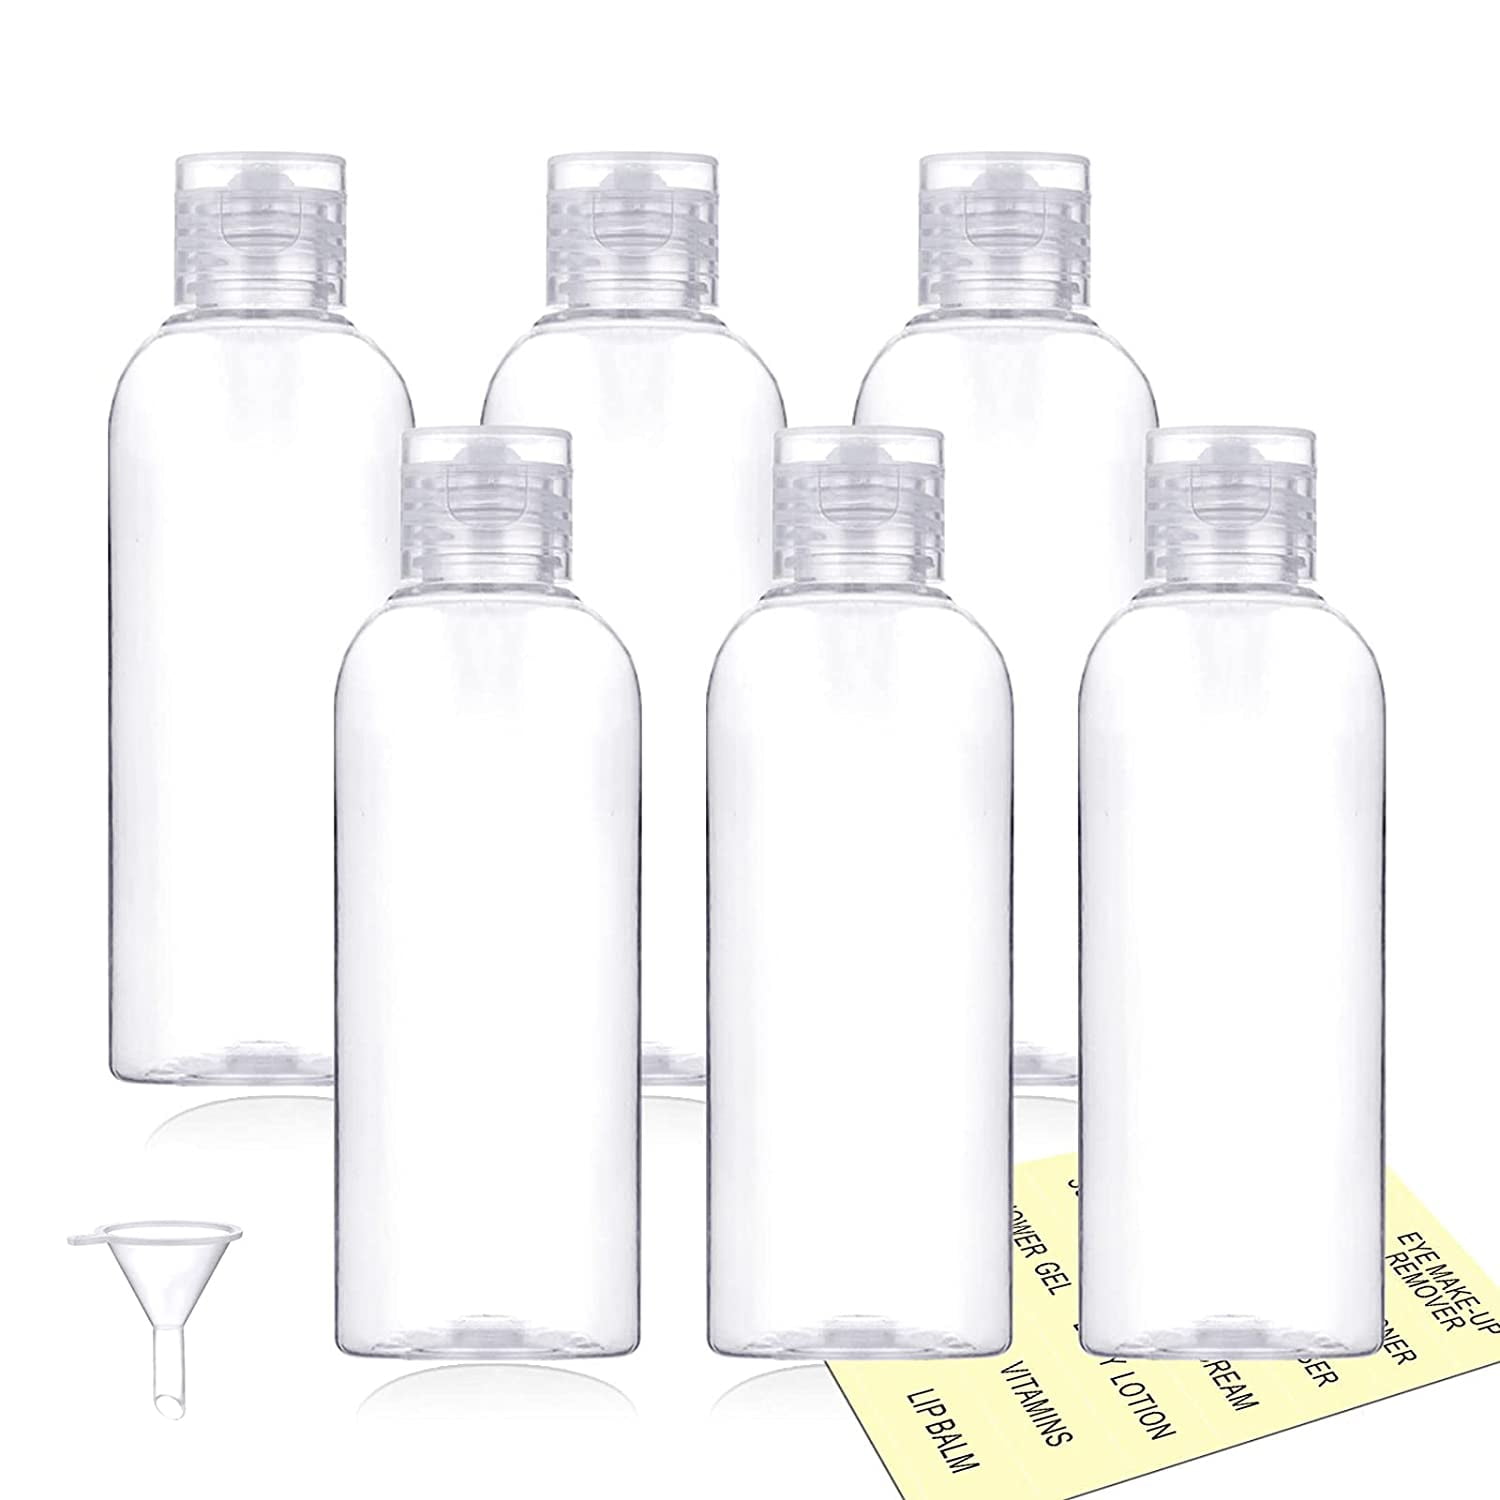 Wholesale Travel Size Plastic Squeeze Plastic Milk Bottles With Flip Lid  30ml And 50ml Sizes For Liquids, Makeup, Toiletries, And Cosmetics From  Prettycase, $0.48